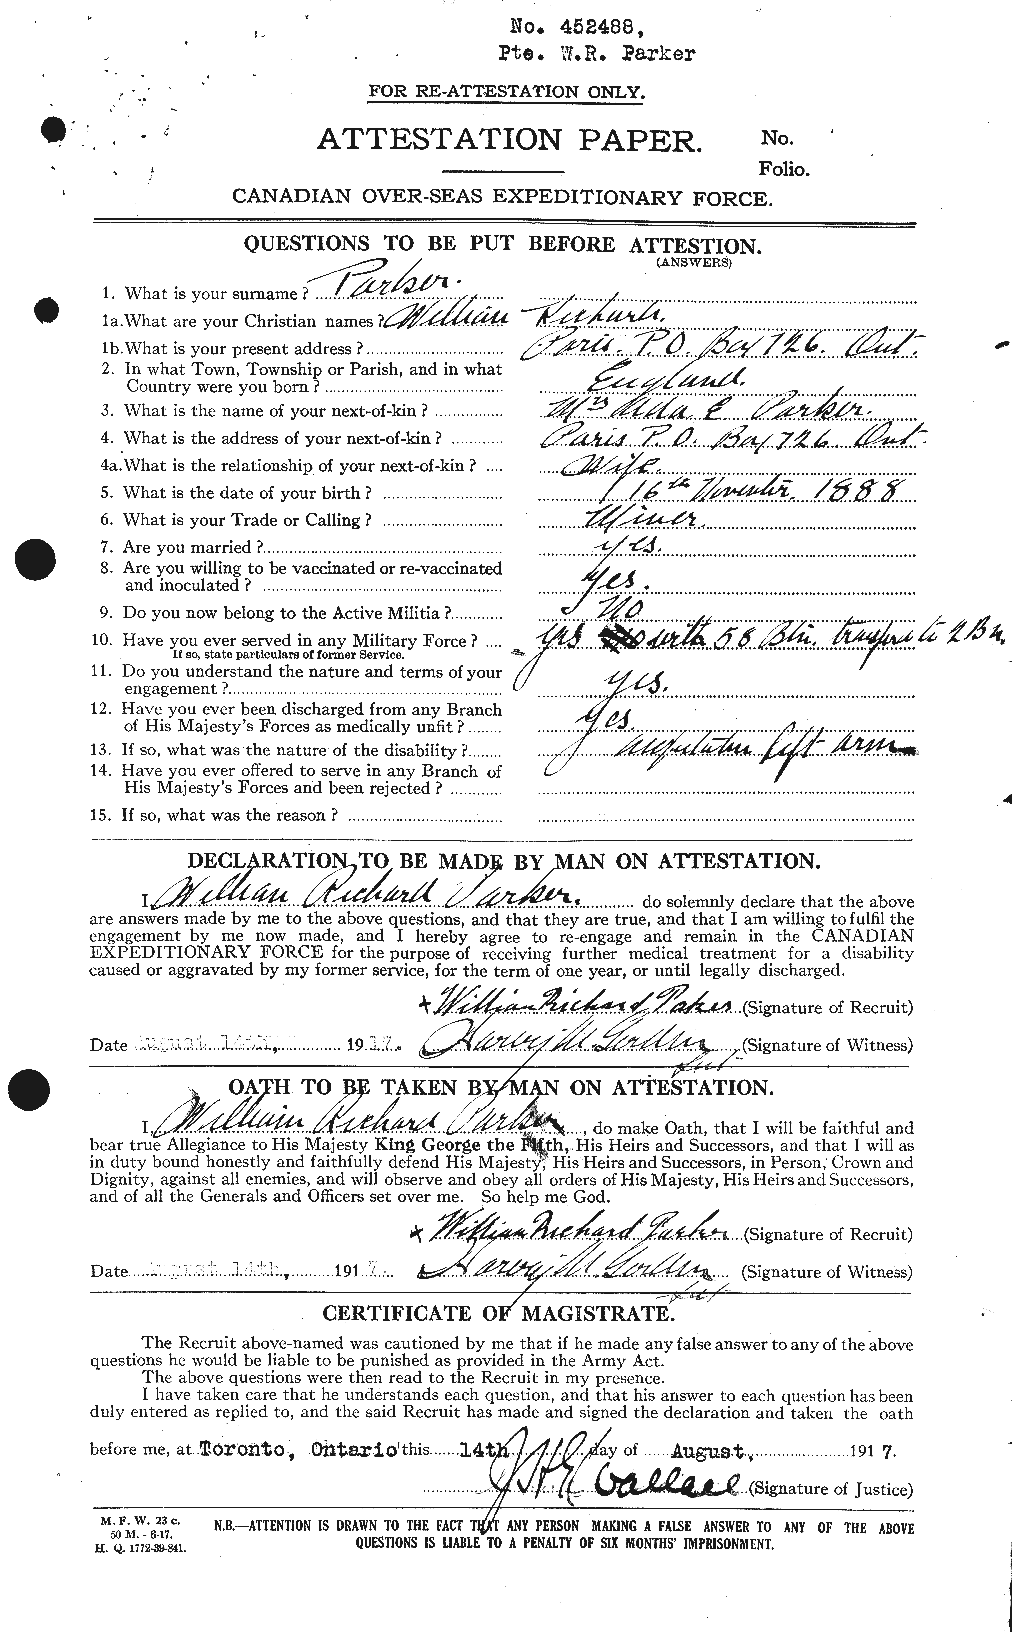 Personnel Records of the First World War - CEF 565781a